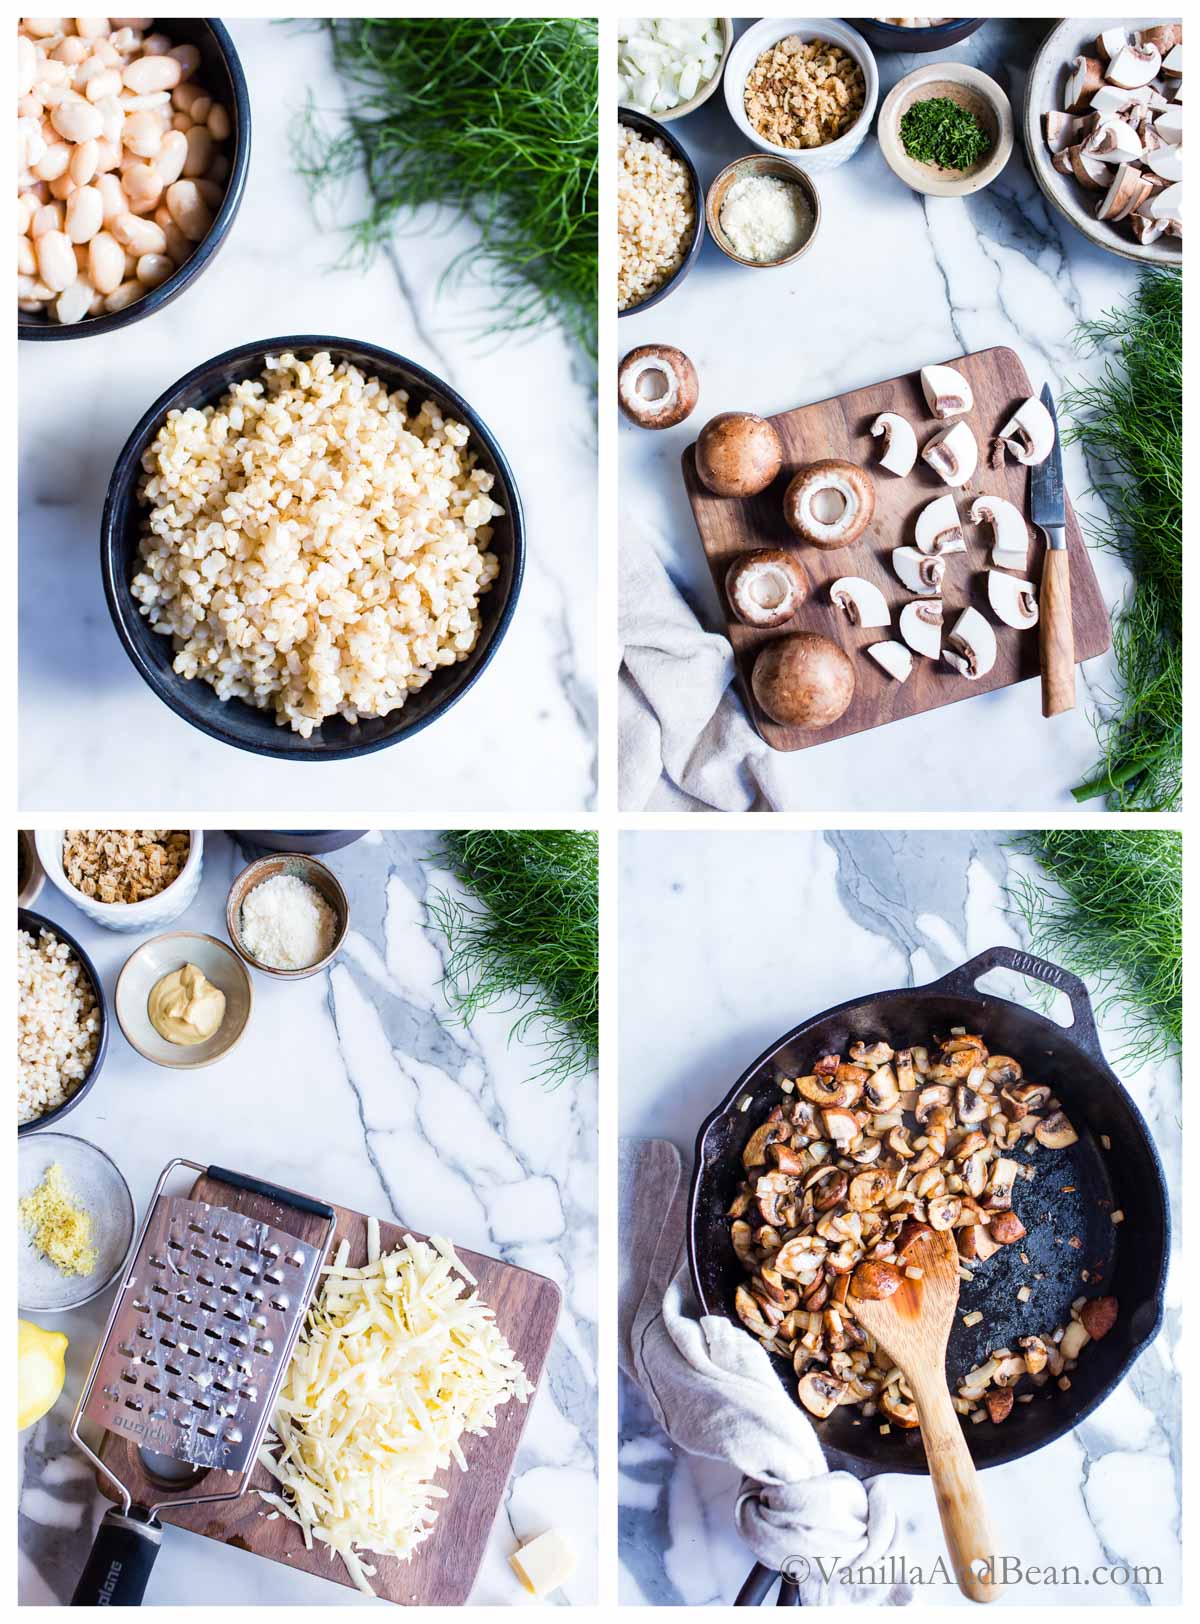 Four images for roasted fennel gratin: 1. cooked brown rice in a bowl. 2. sliced mushrooms on a cutting board. 3. shredded gruyere on a cutting board. 4. sauteed mushrooms in a skillet. 